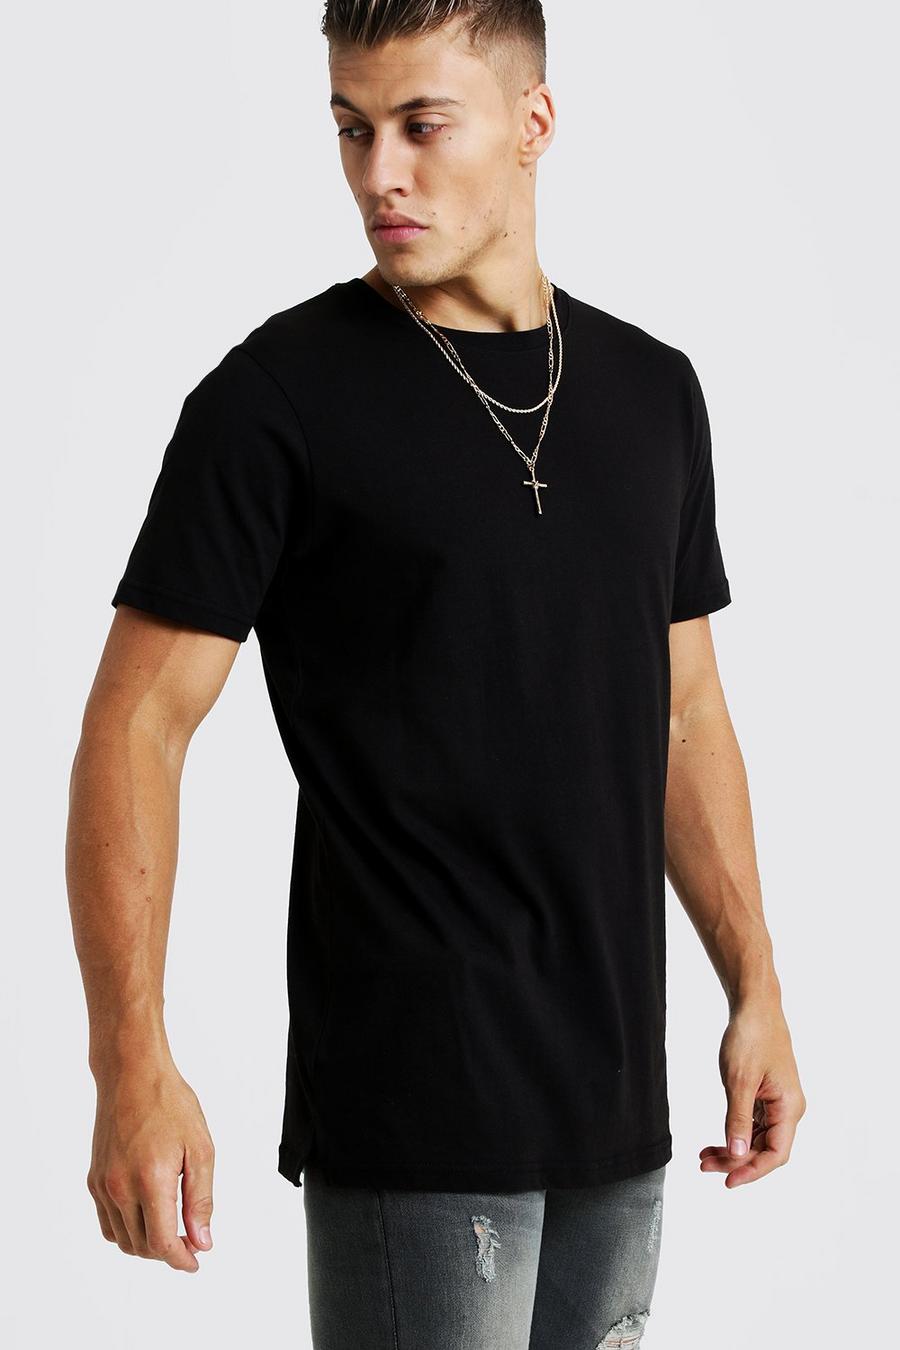 Here's why your next T-shirt should be a longline